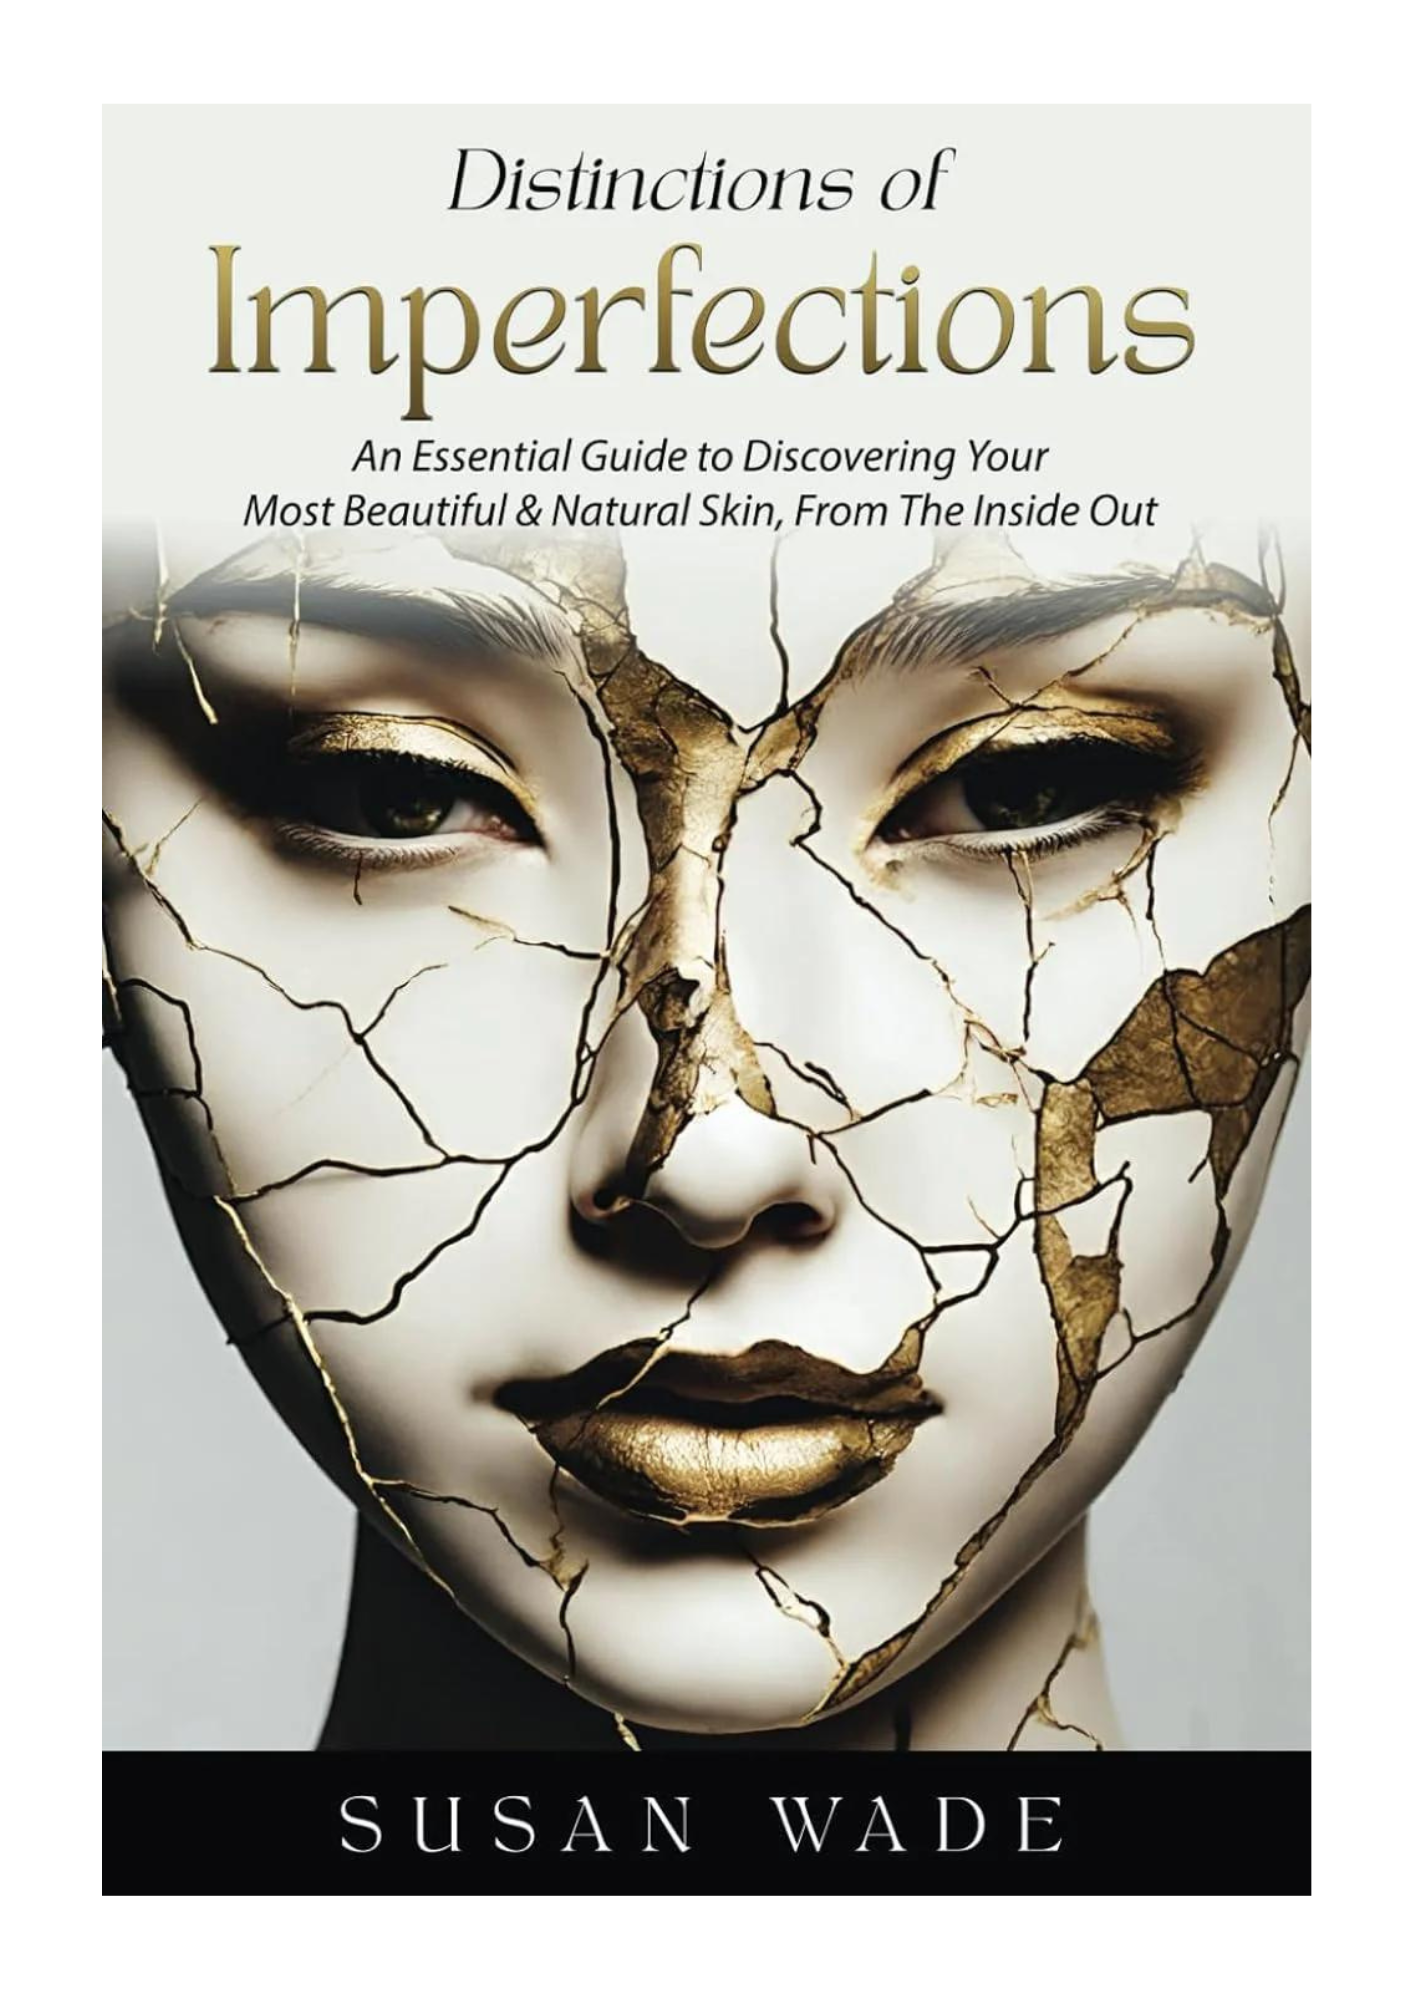 Paperback Book: Distinctions of Imperfection - An Essential Guide to Discovering Your Most Beautiful & Natural Skin, From the Inside Out